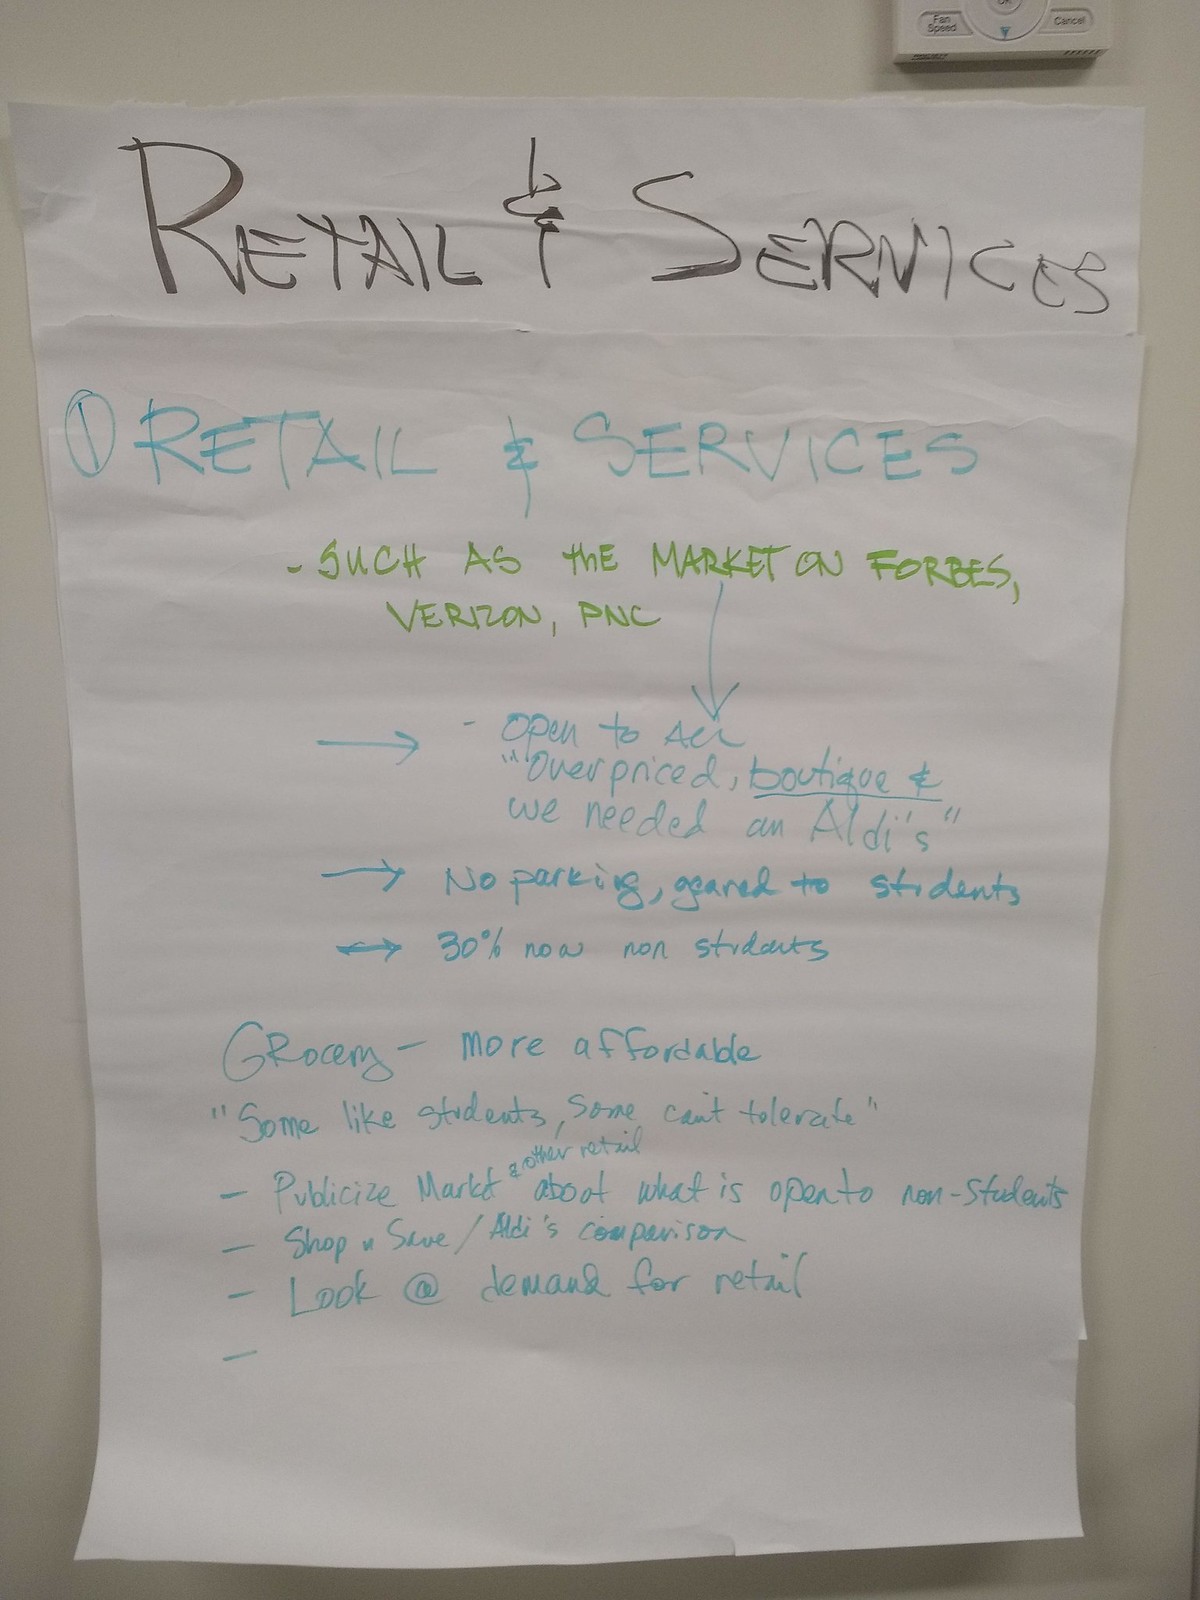 IMP Retail and Services